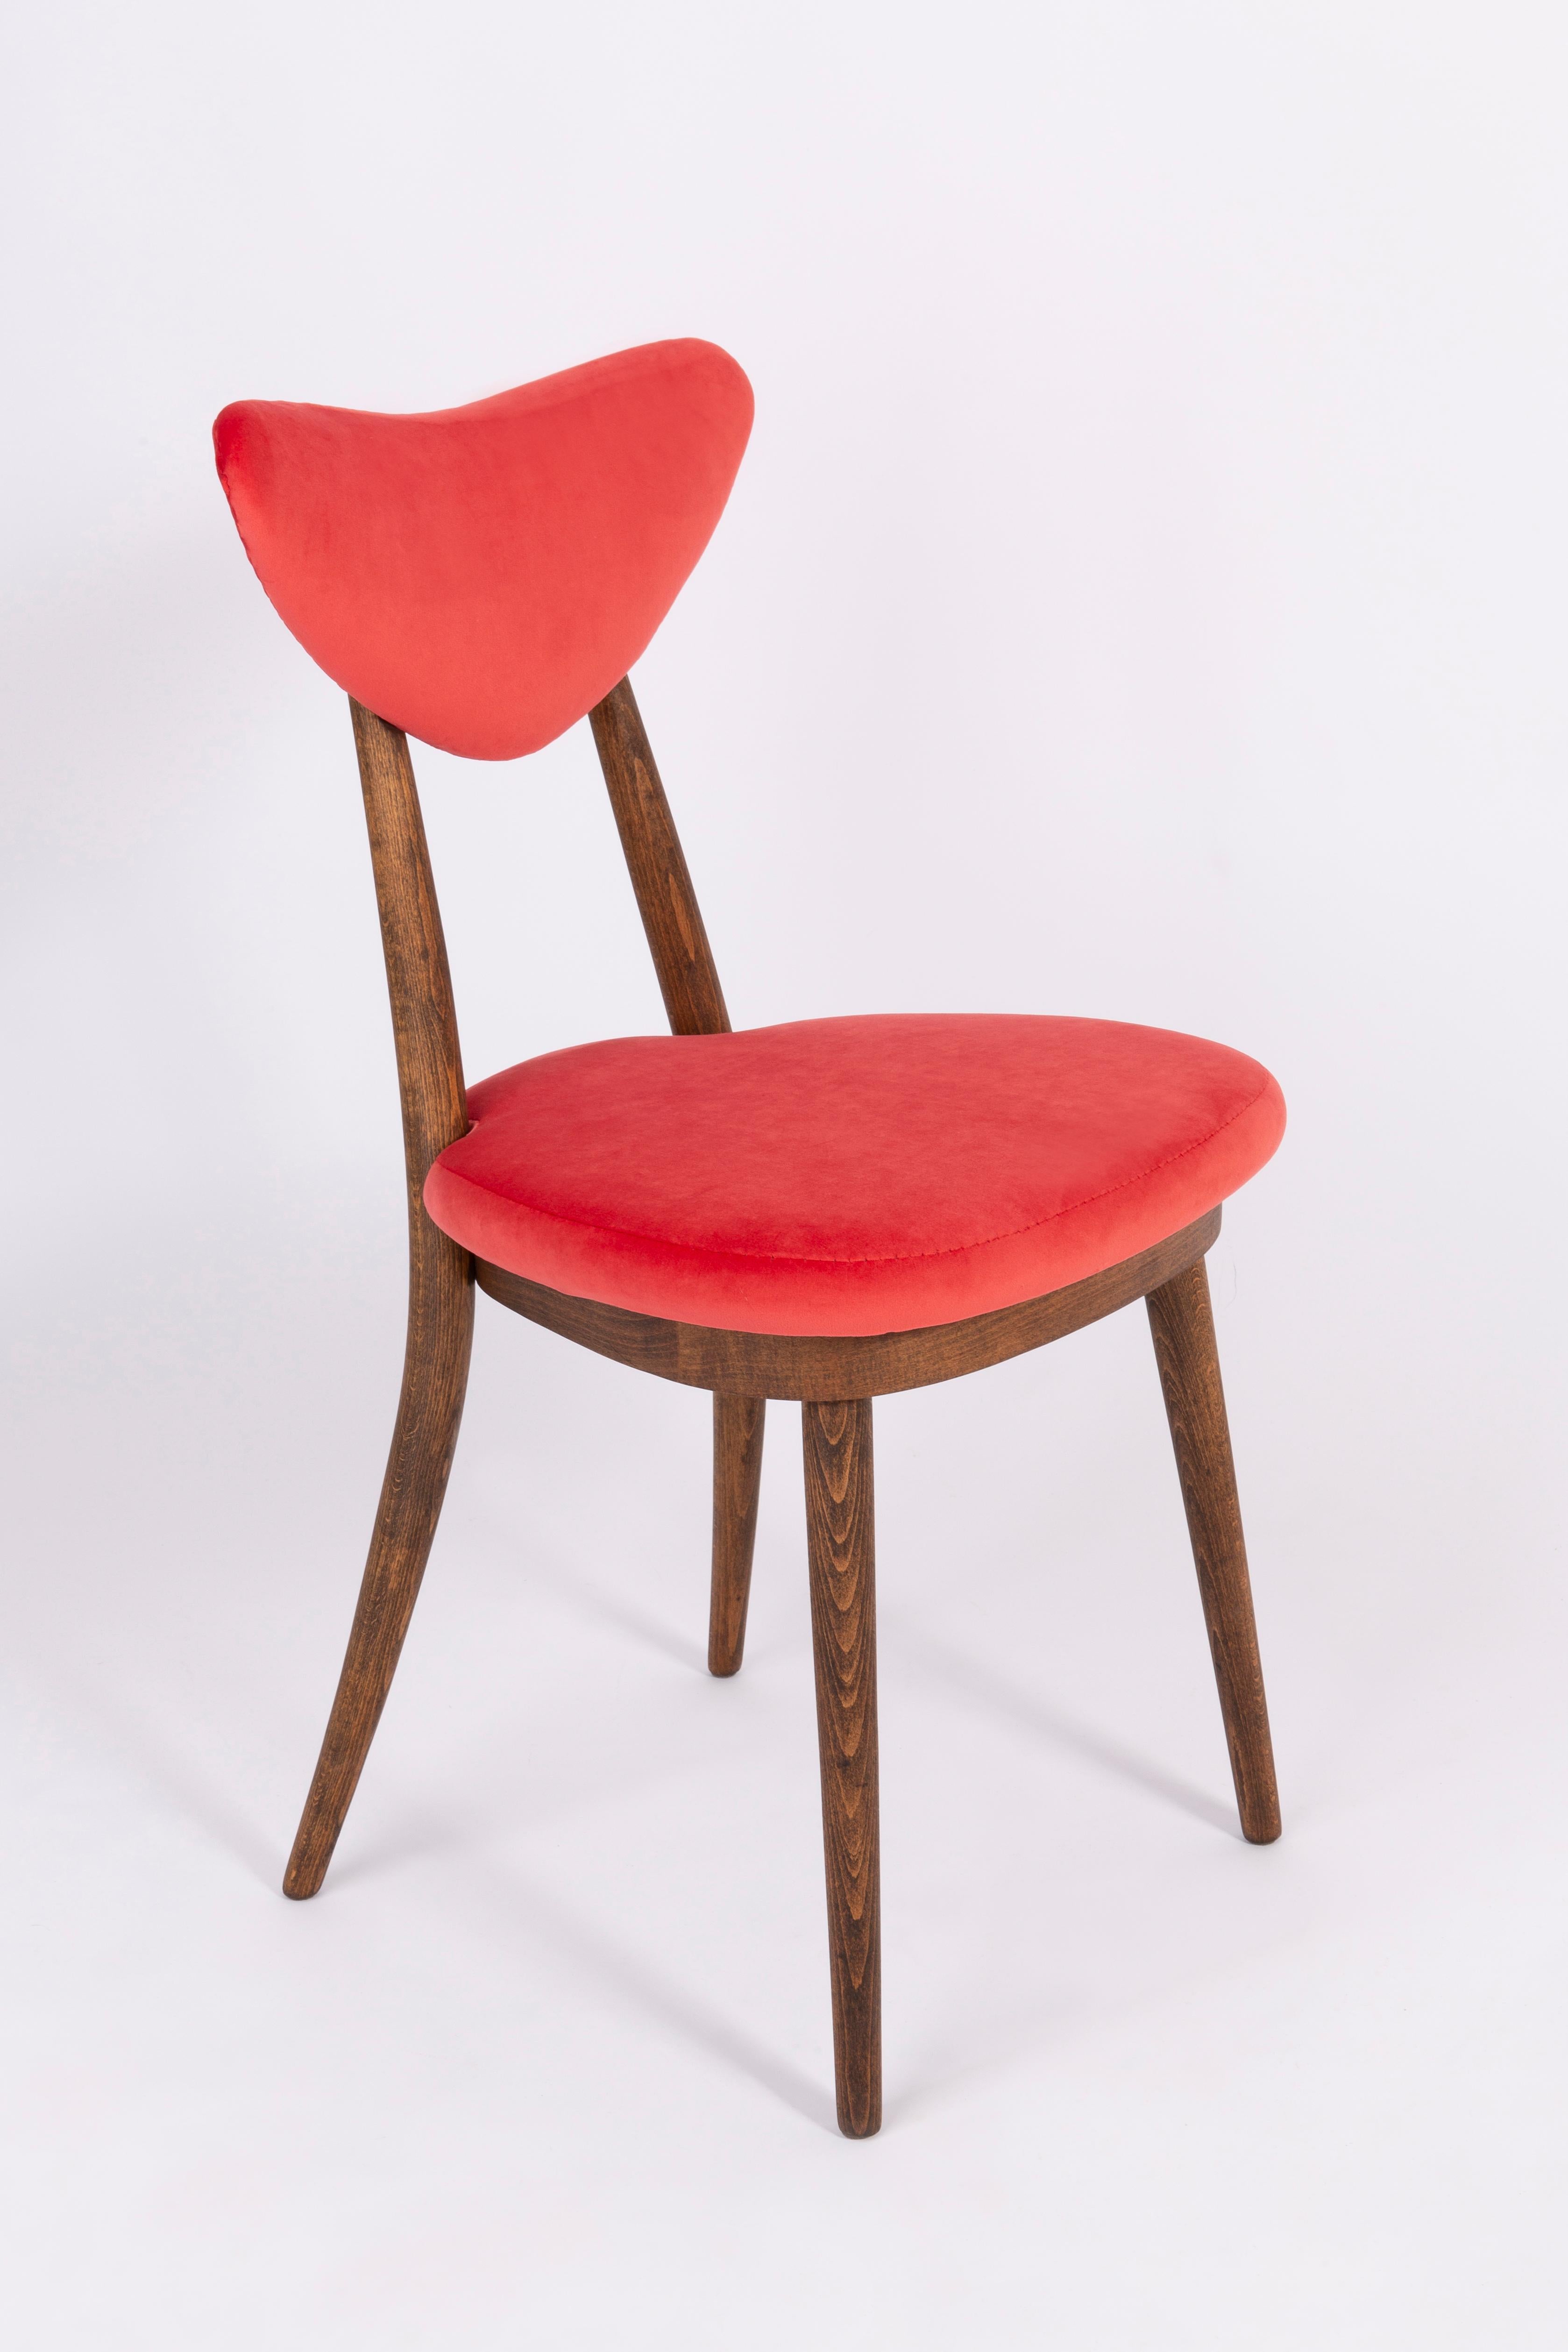 Pair of Red Heart Chairs, Poland, 1960s For Sale 4